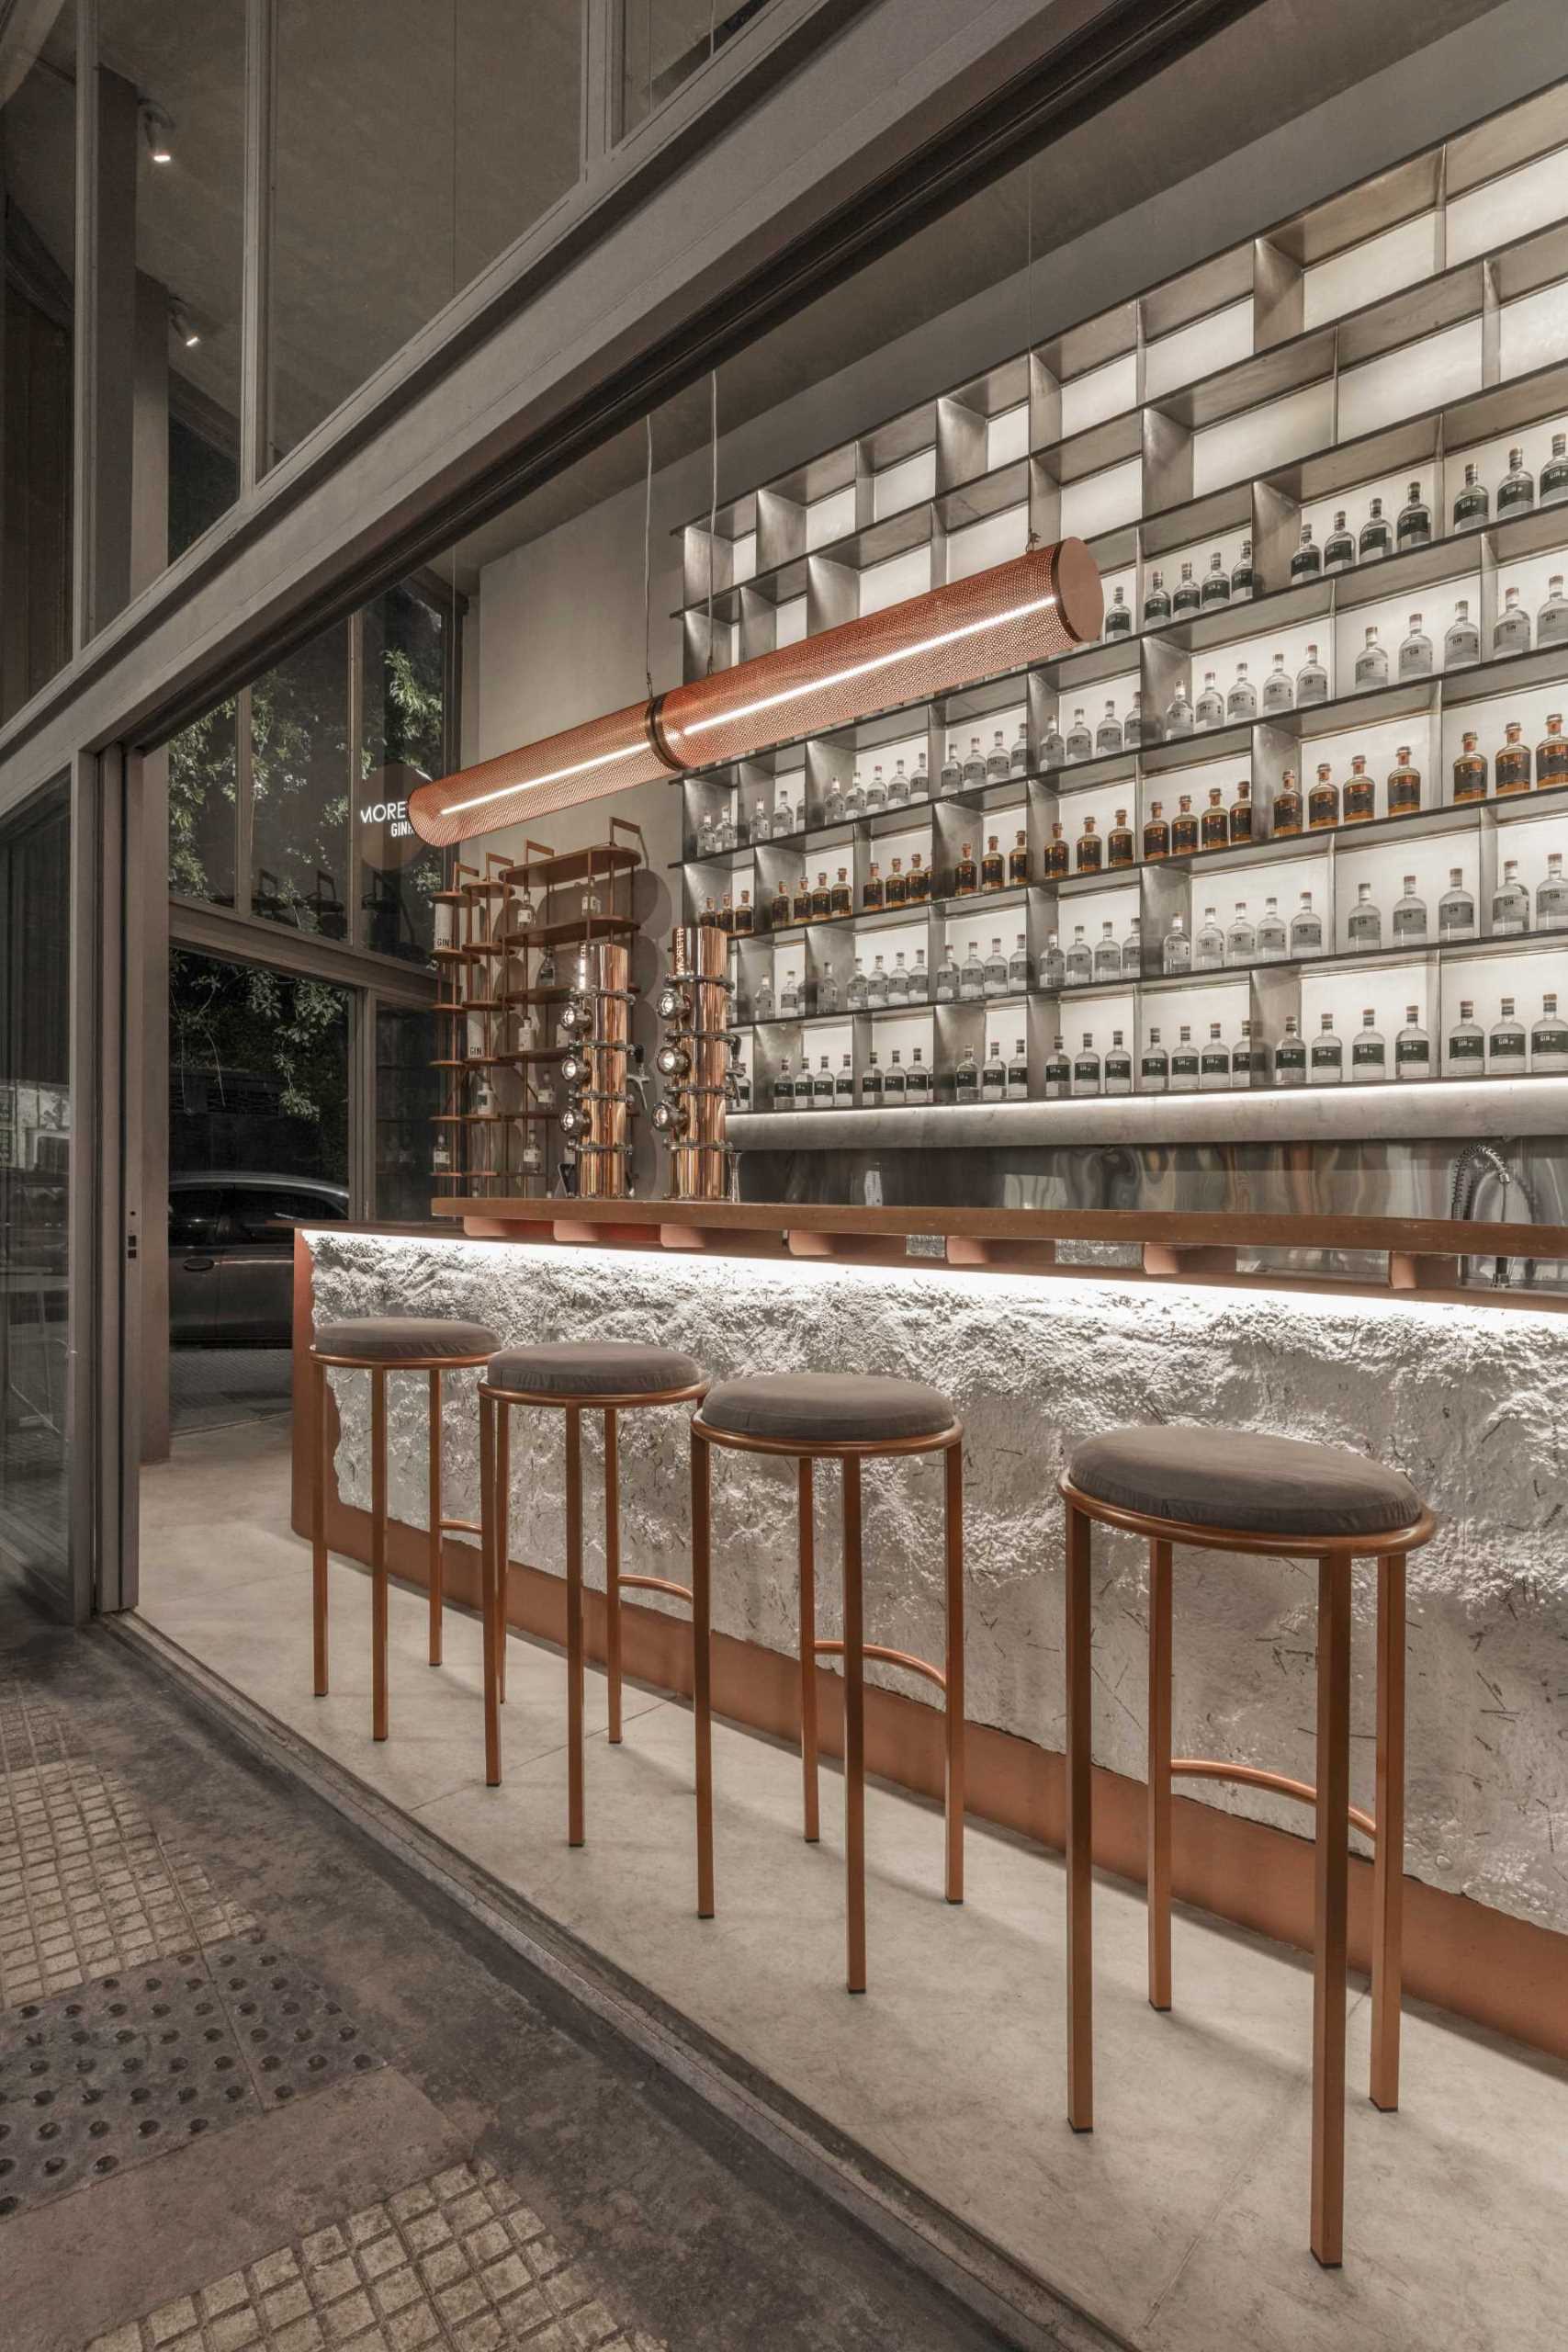 A modern gin bar has an interior inspired by materials found in the distillery.